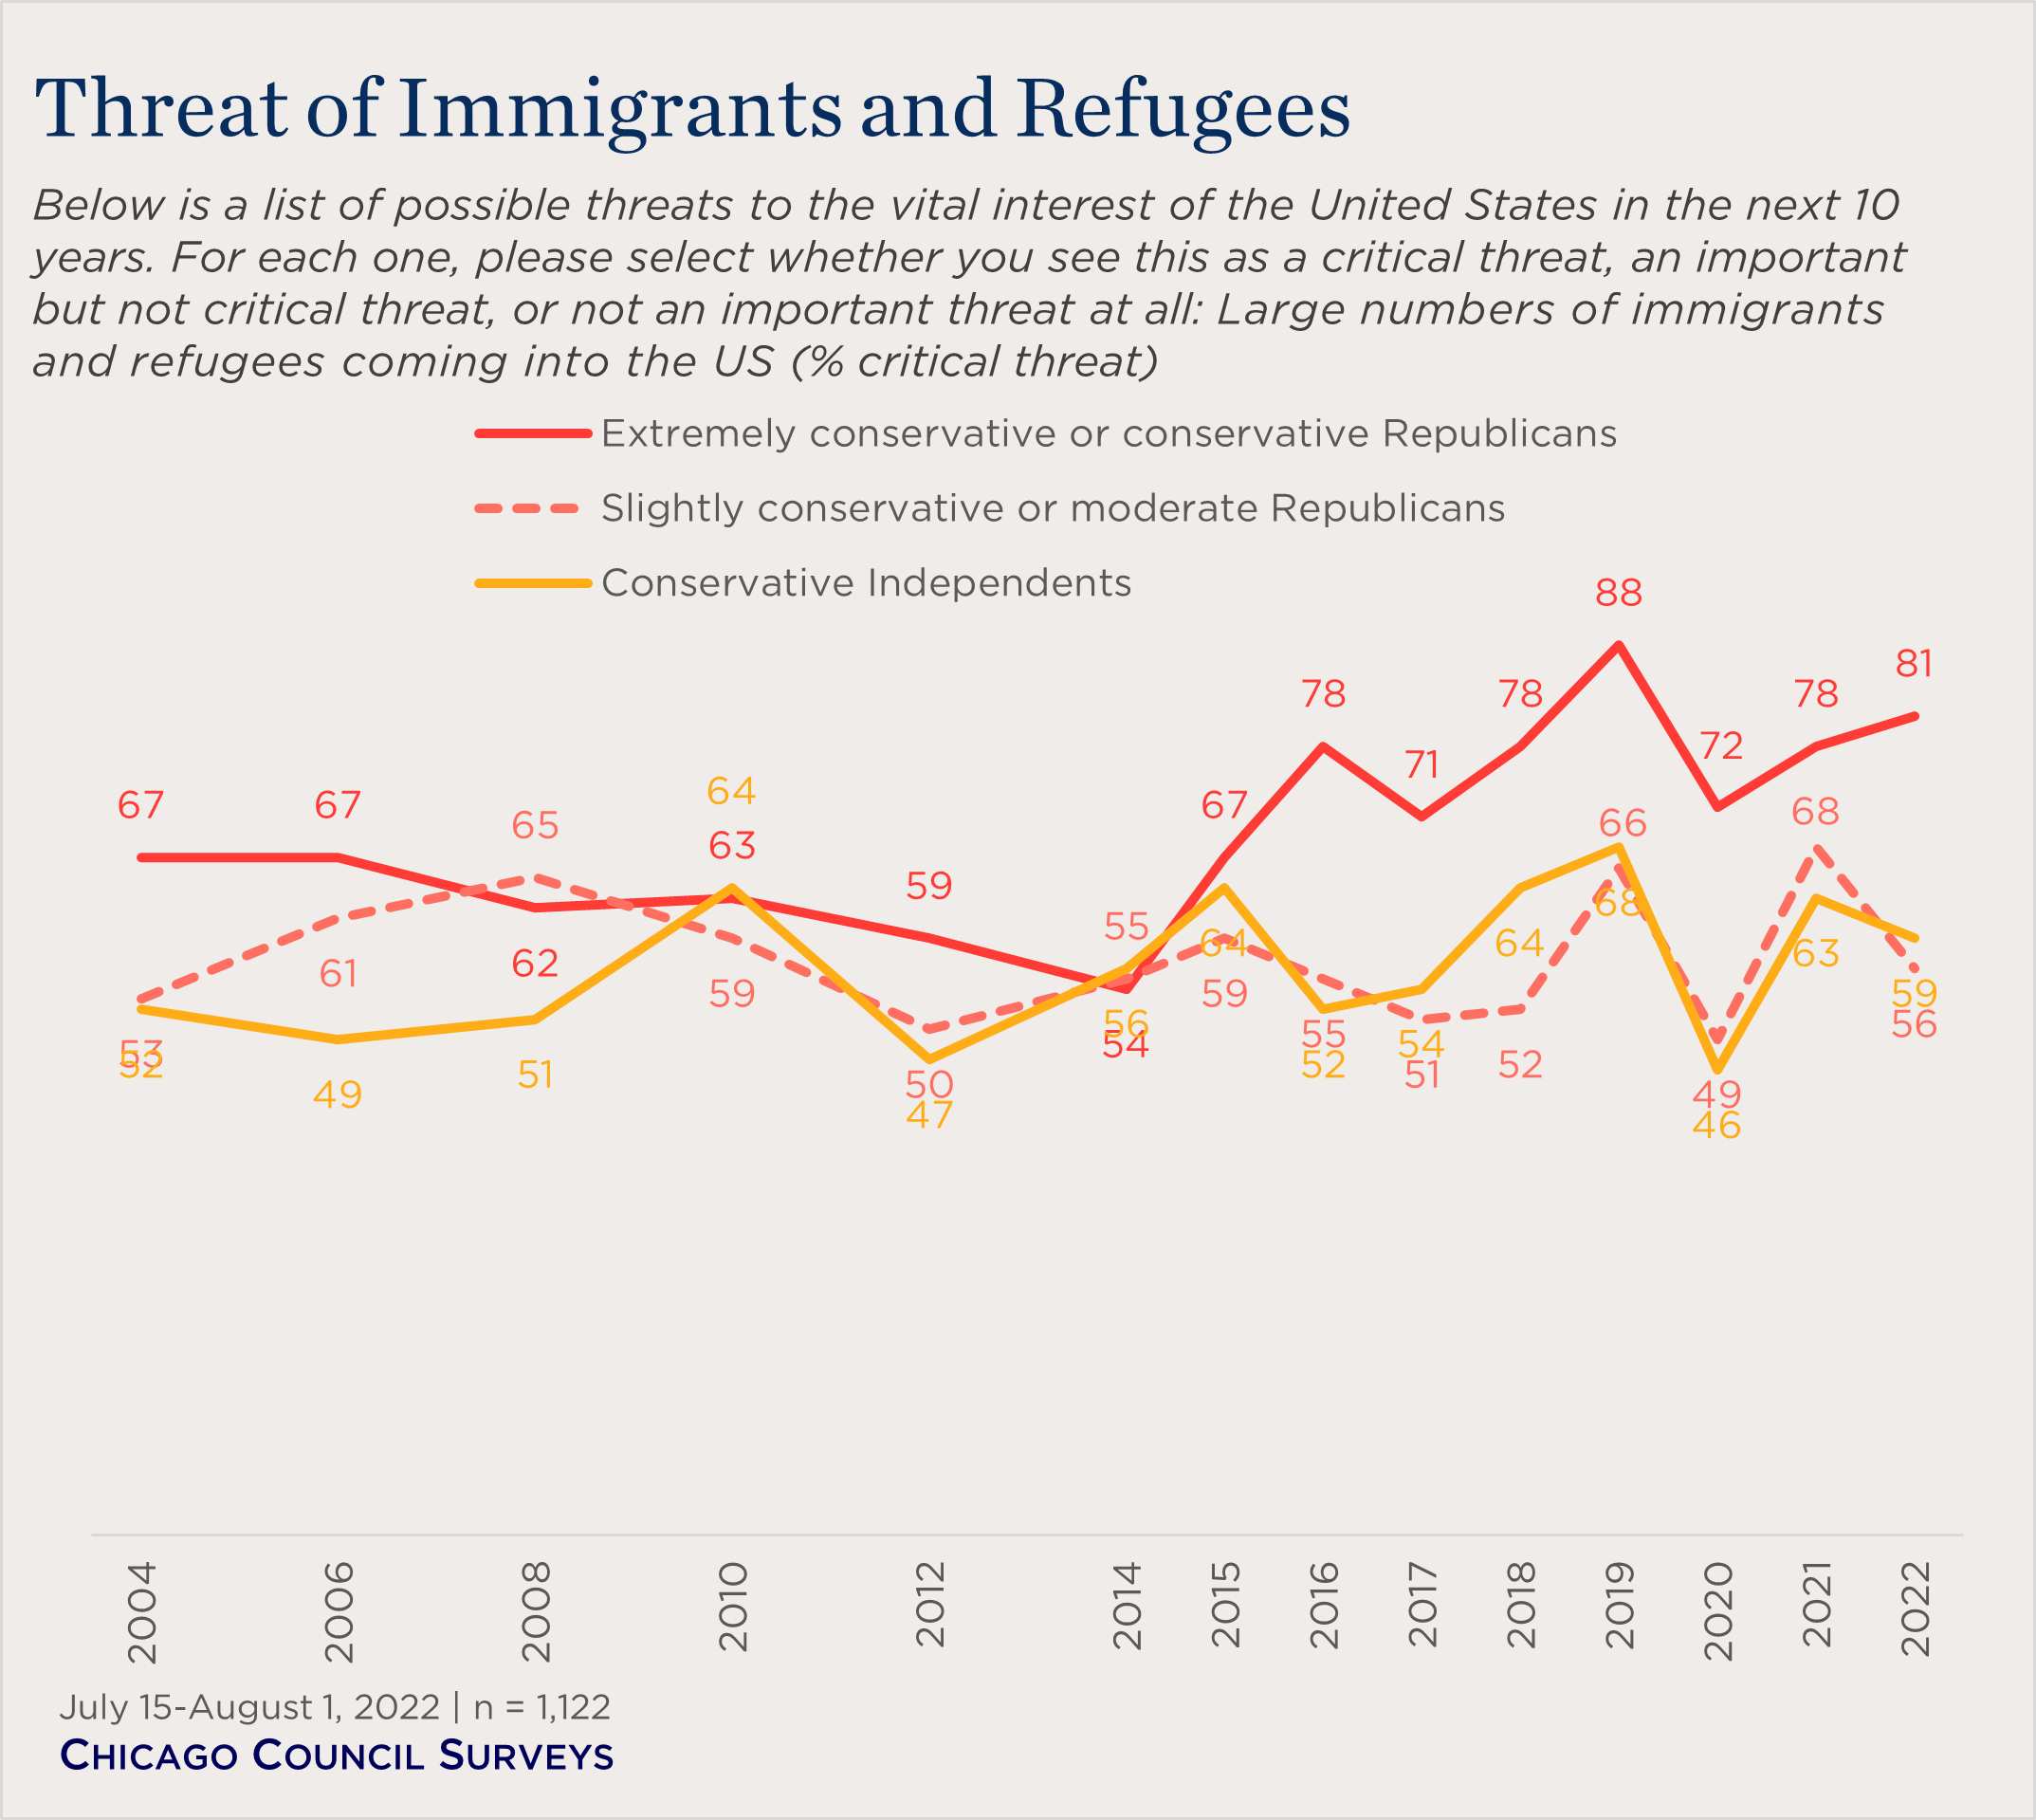 "line chart showing ideological views of immigration as a threat"